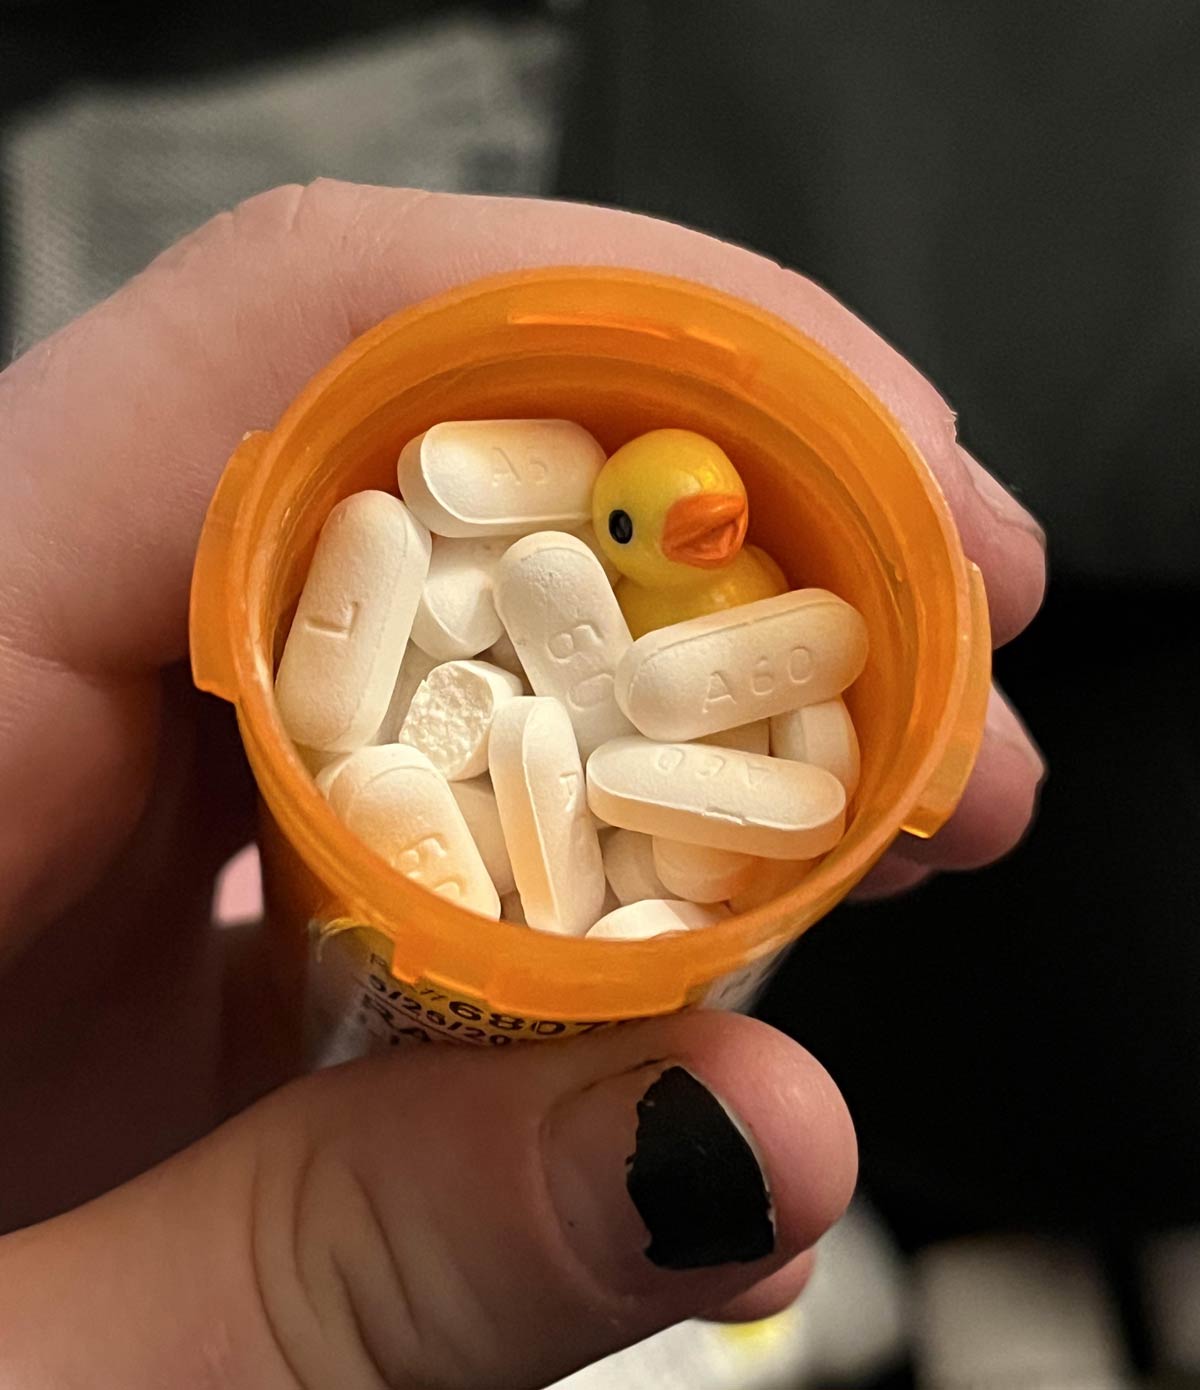 I keep a tiny rubber ducky in my anti depressants